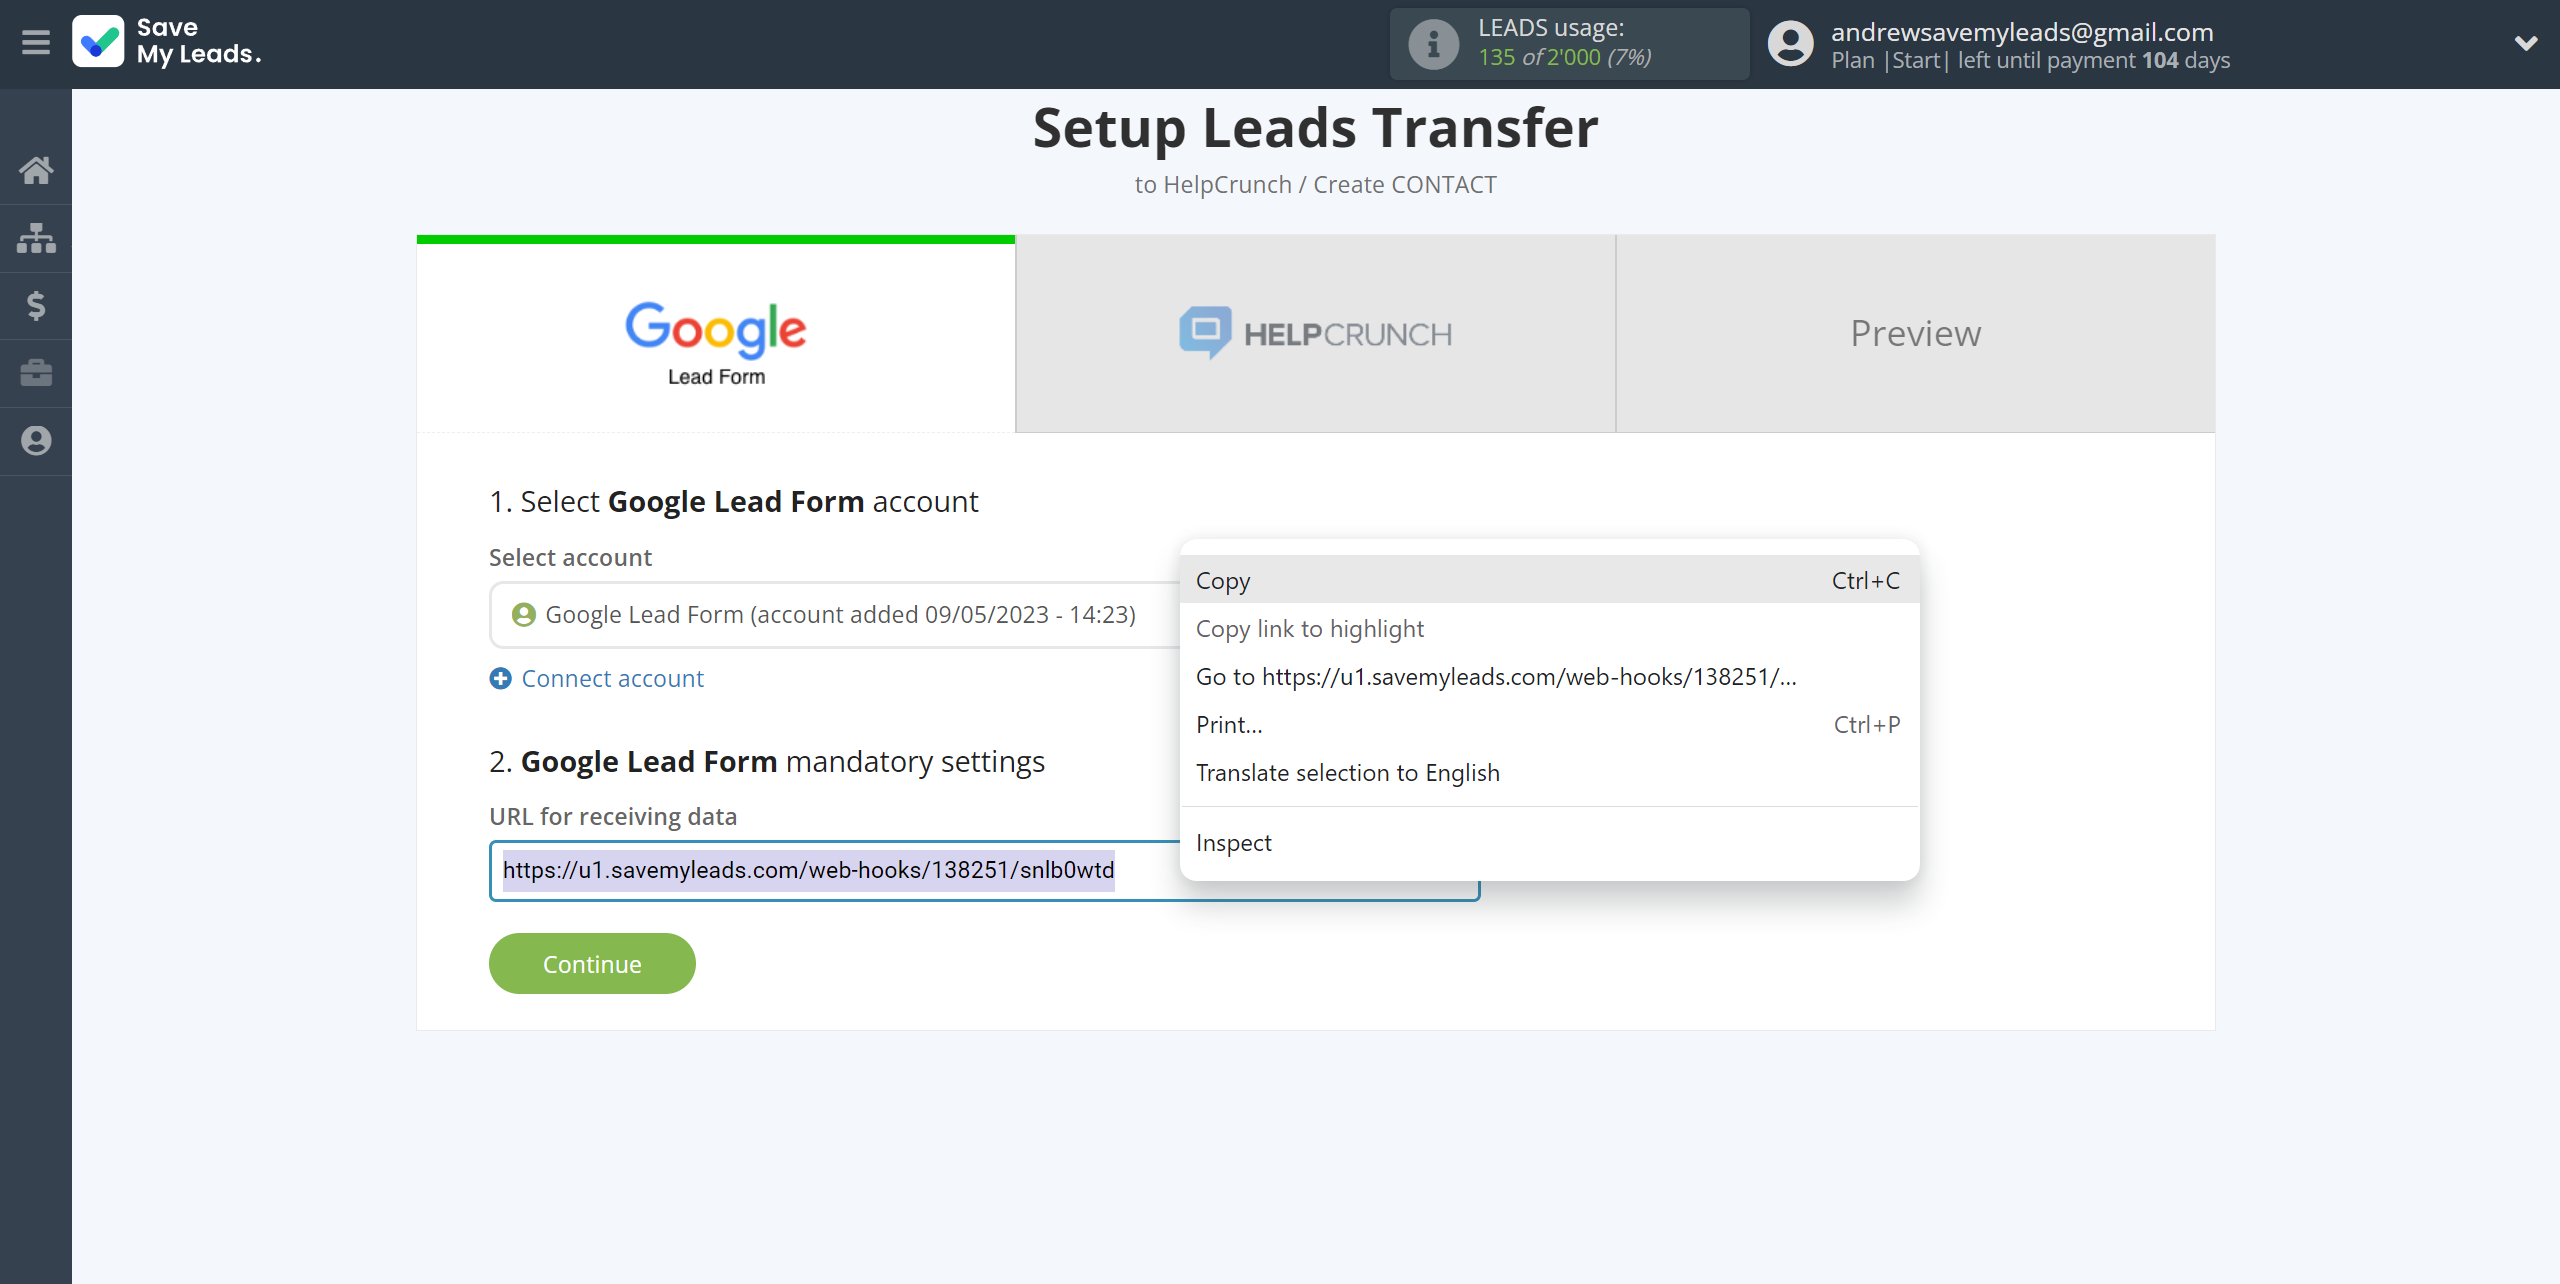 How to Connect Google Lead Form with HelpCrunch Create Contacts | Data Source account connection